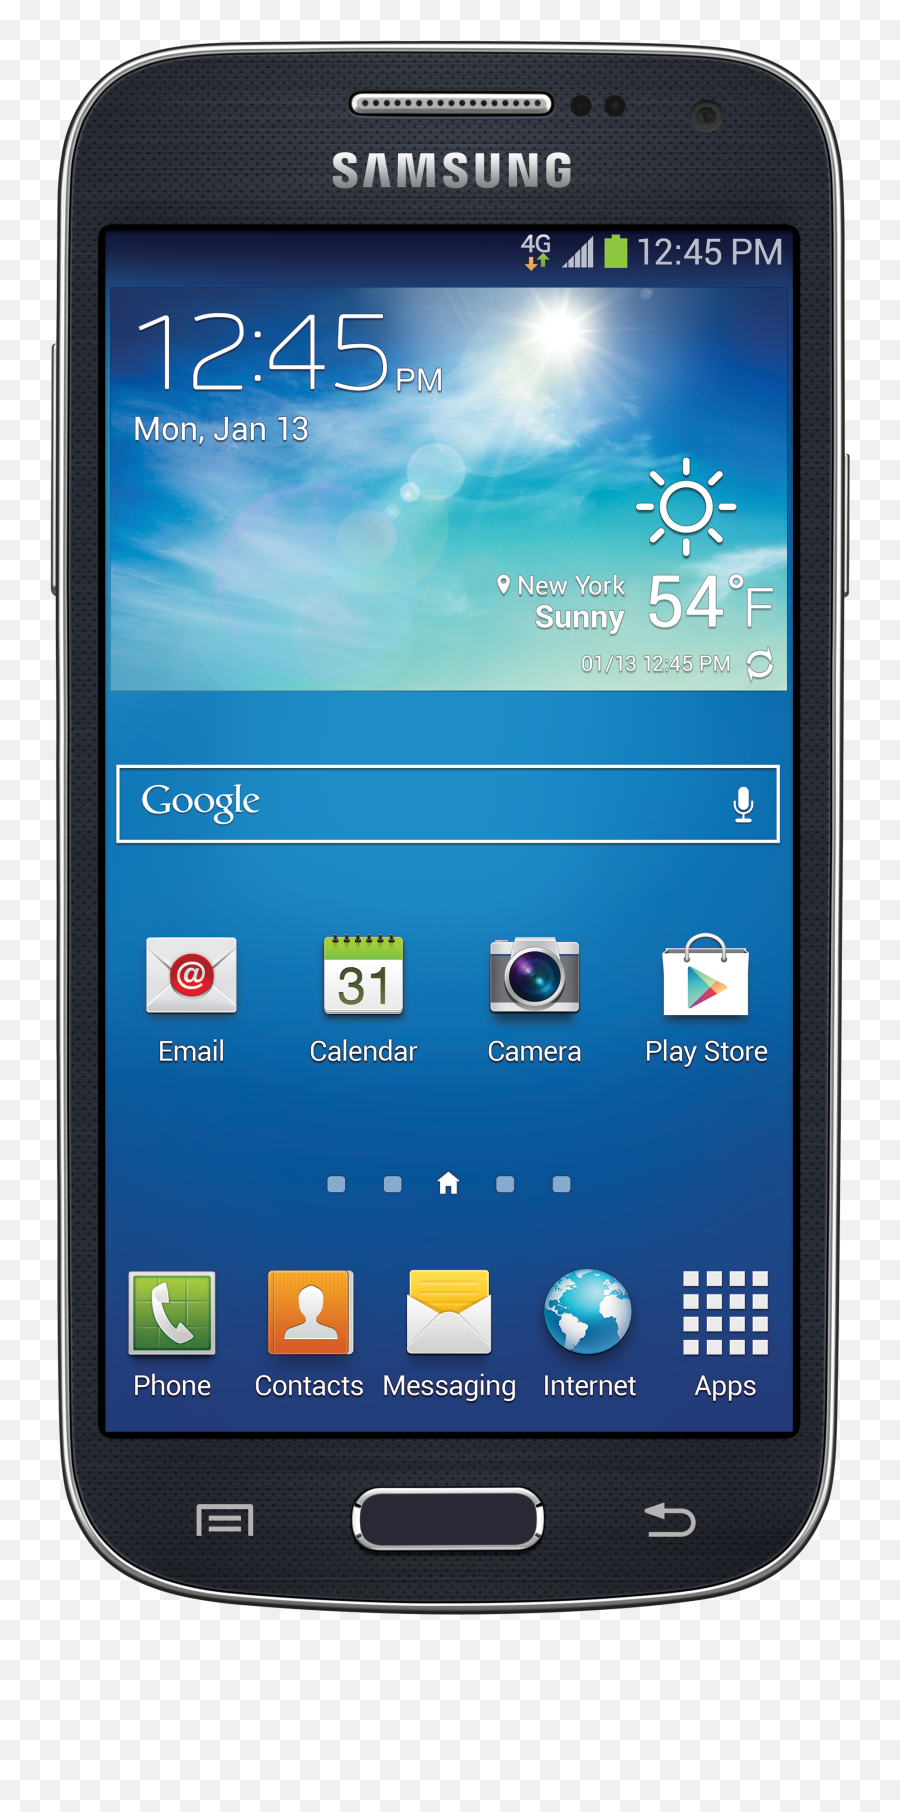 Android Smartphone Png Image - Samsung Galaxy S4 Active Emoji,How To Get Iphone Emojis On Galaxy S4